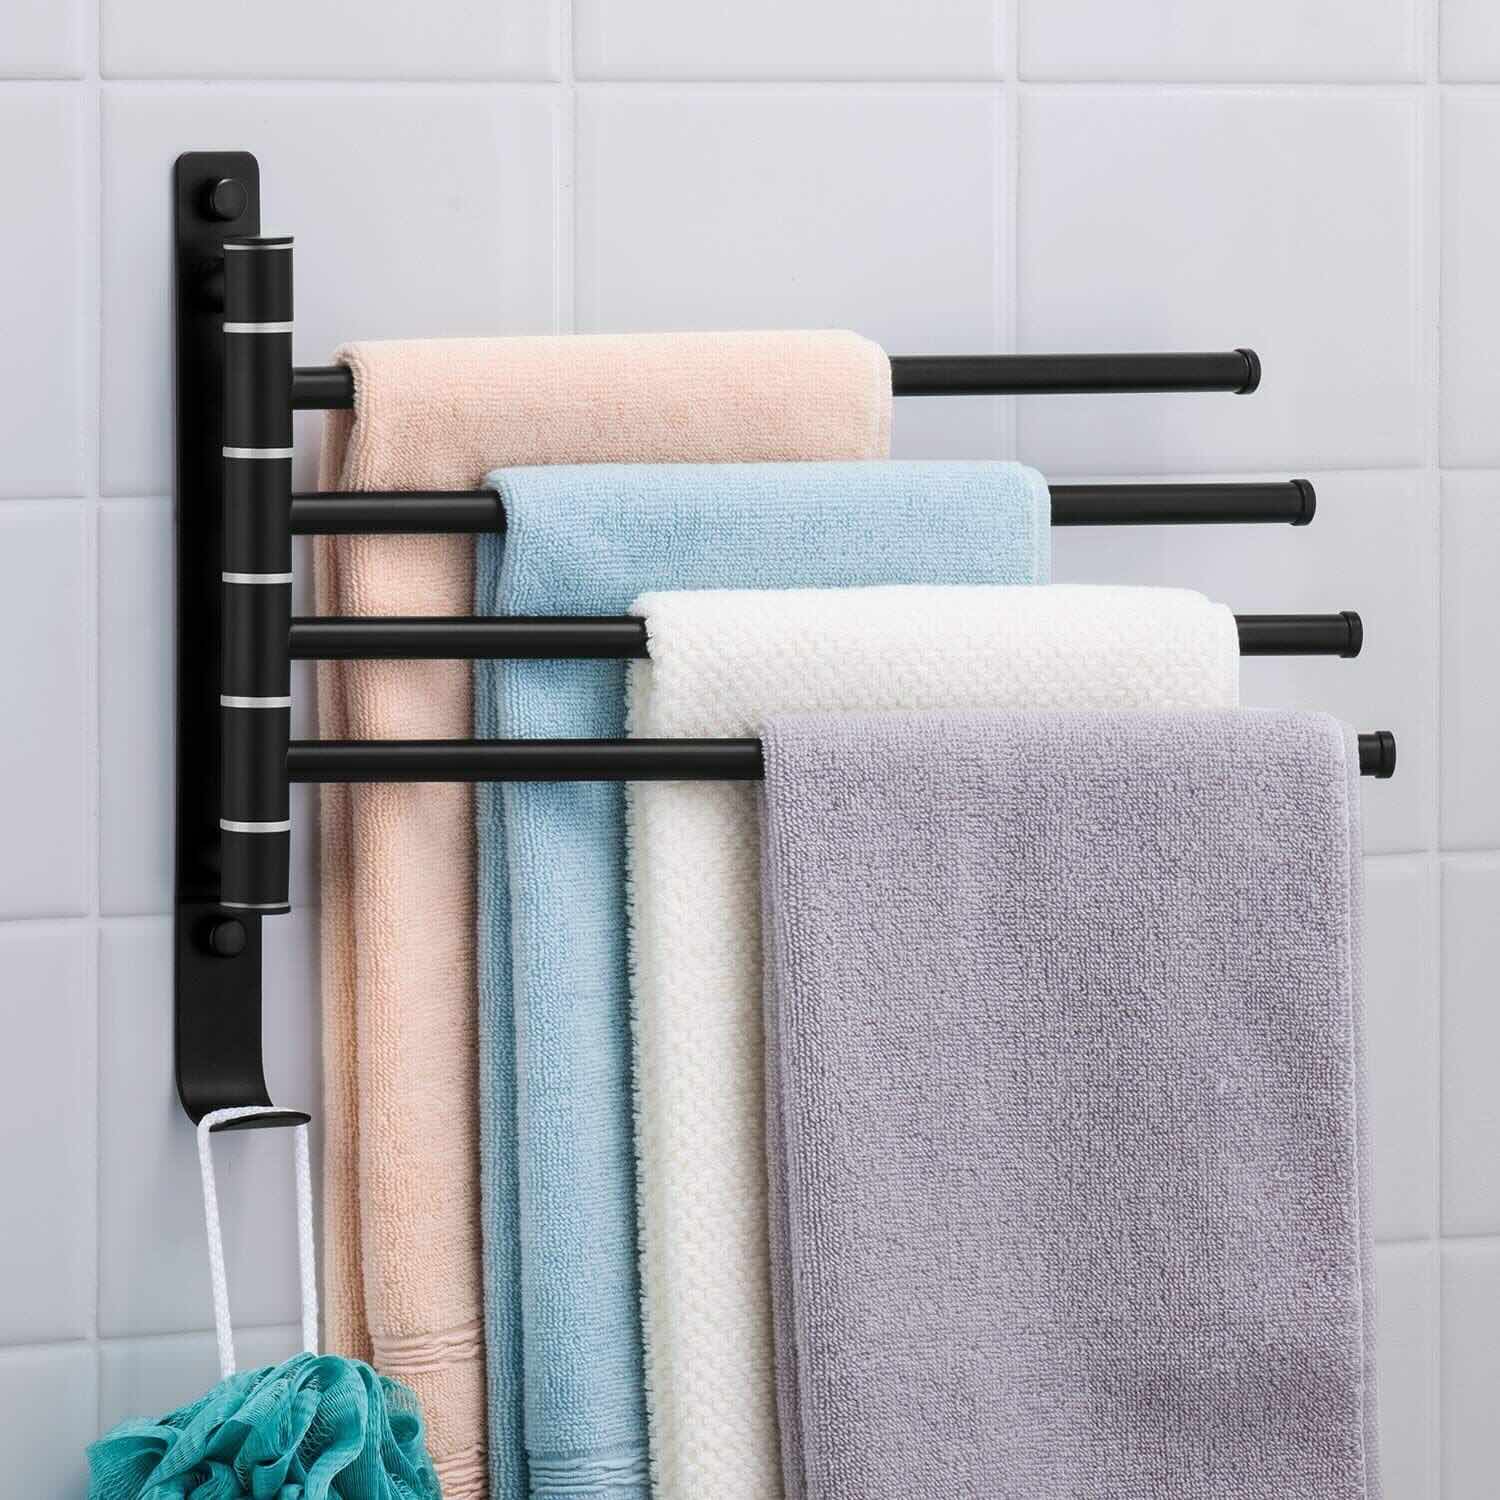 Rotary Towel Rack with 4 Swivel Bars, Wall-Mounted Stainless Steel